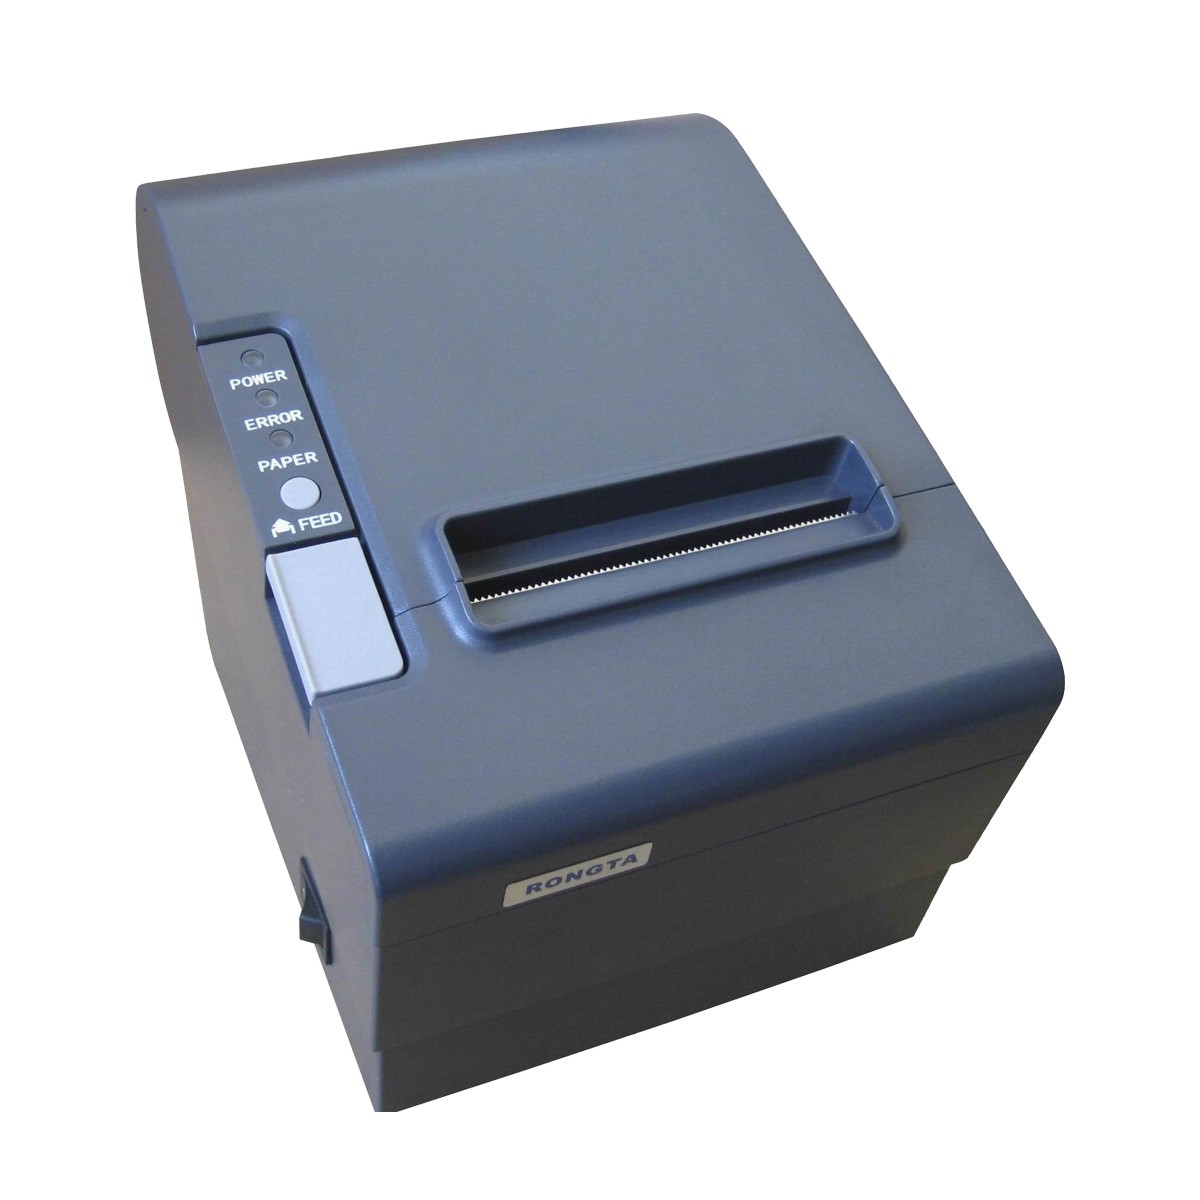 Rongta RP330-USE Auto Cutter Low Noise Thermal POS Printer (Usb+Serial+ Ethernet)